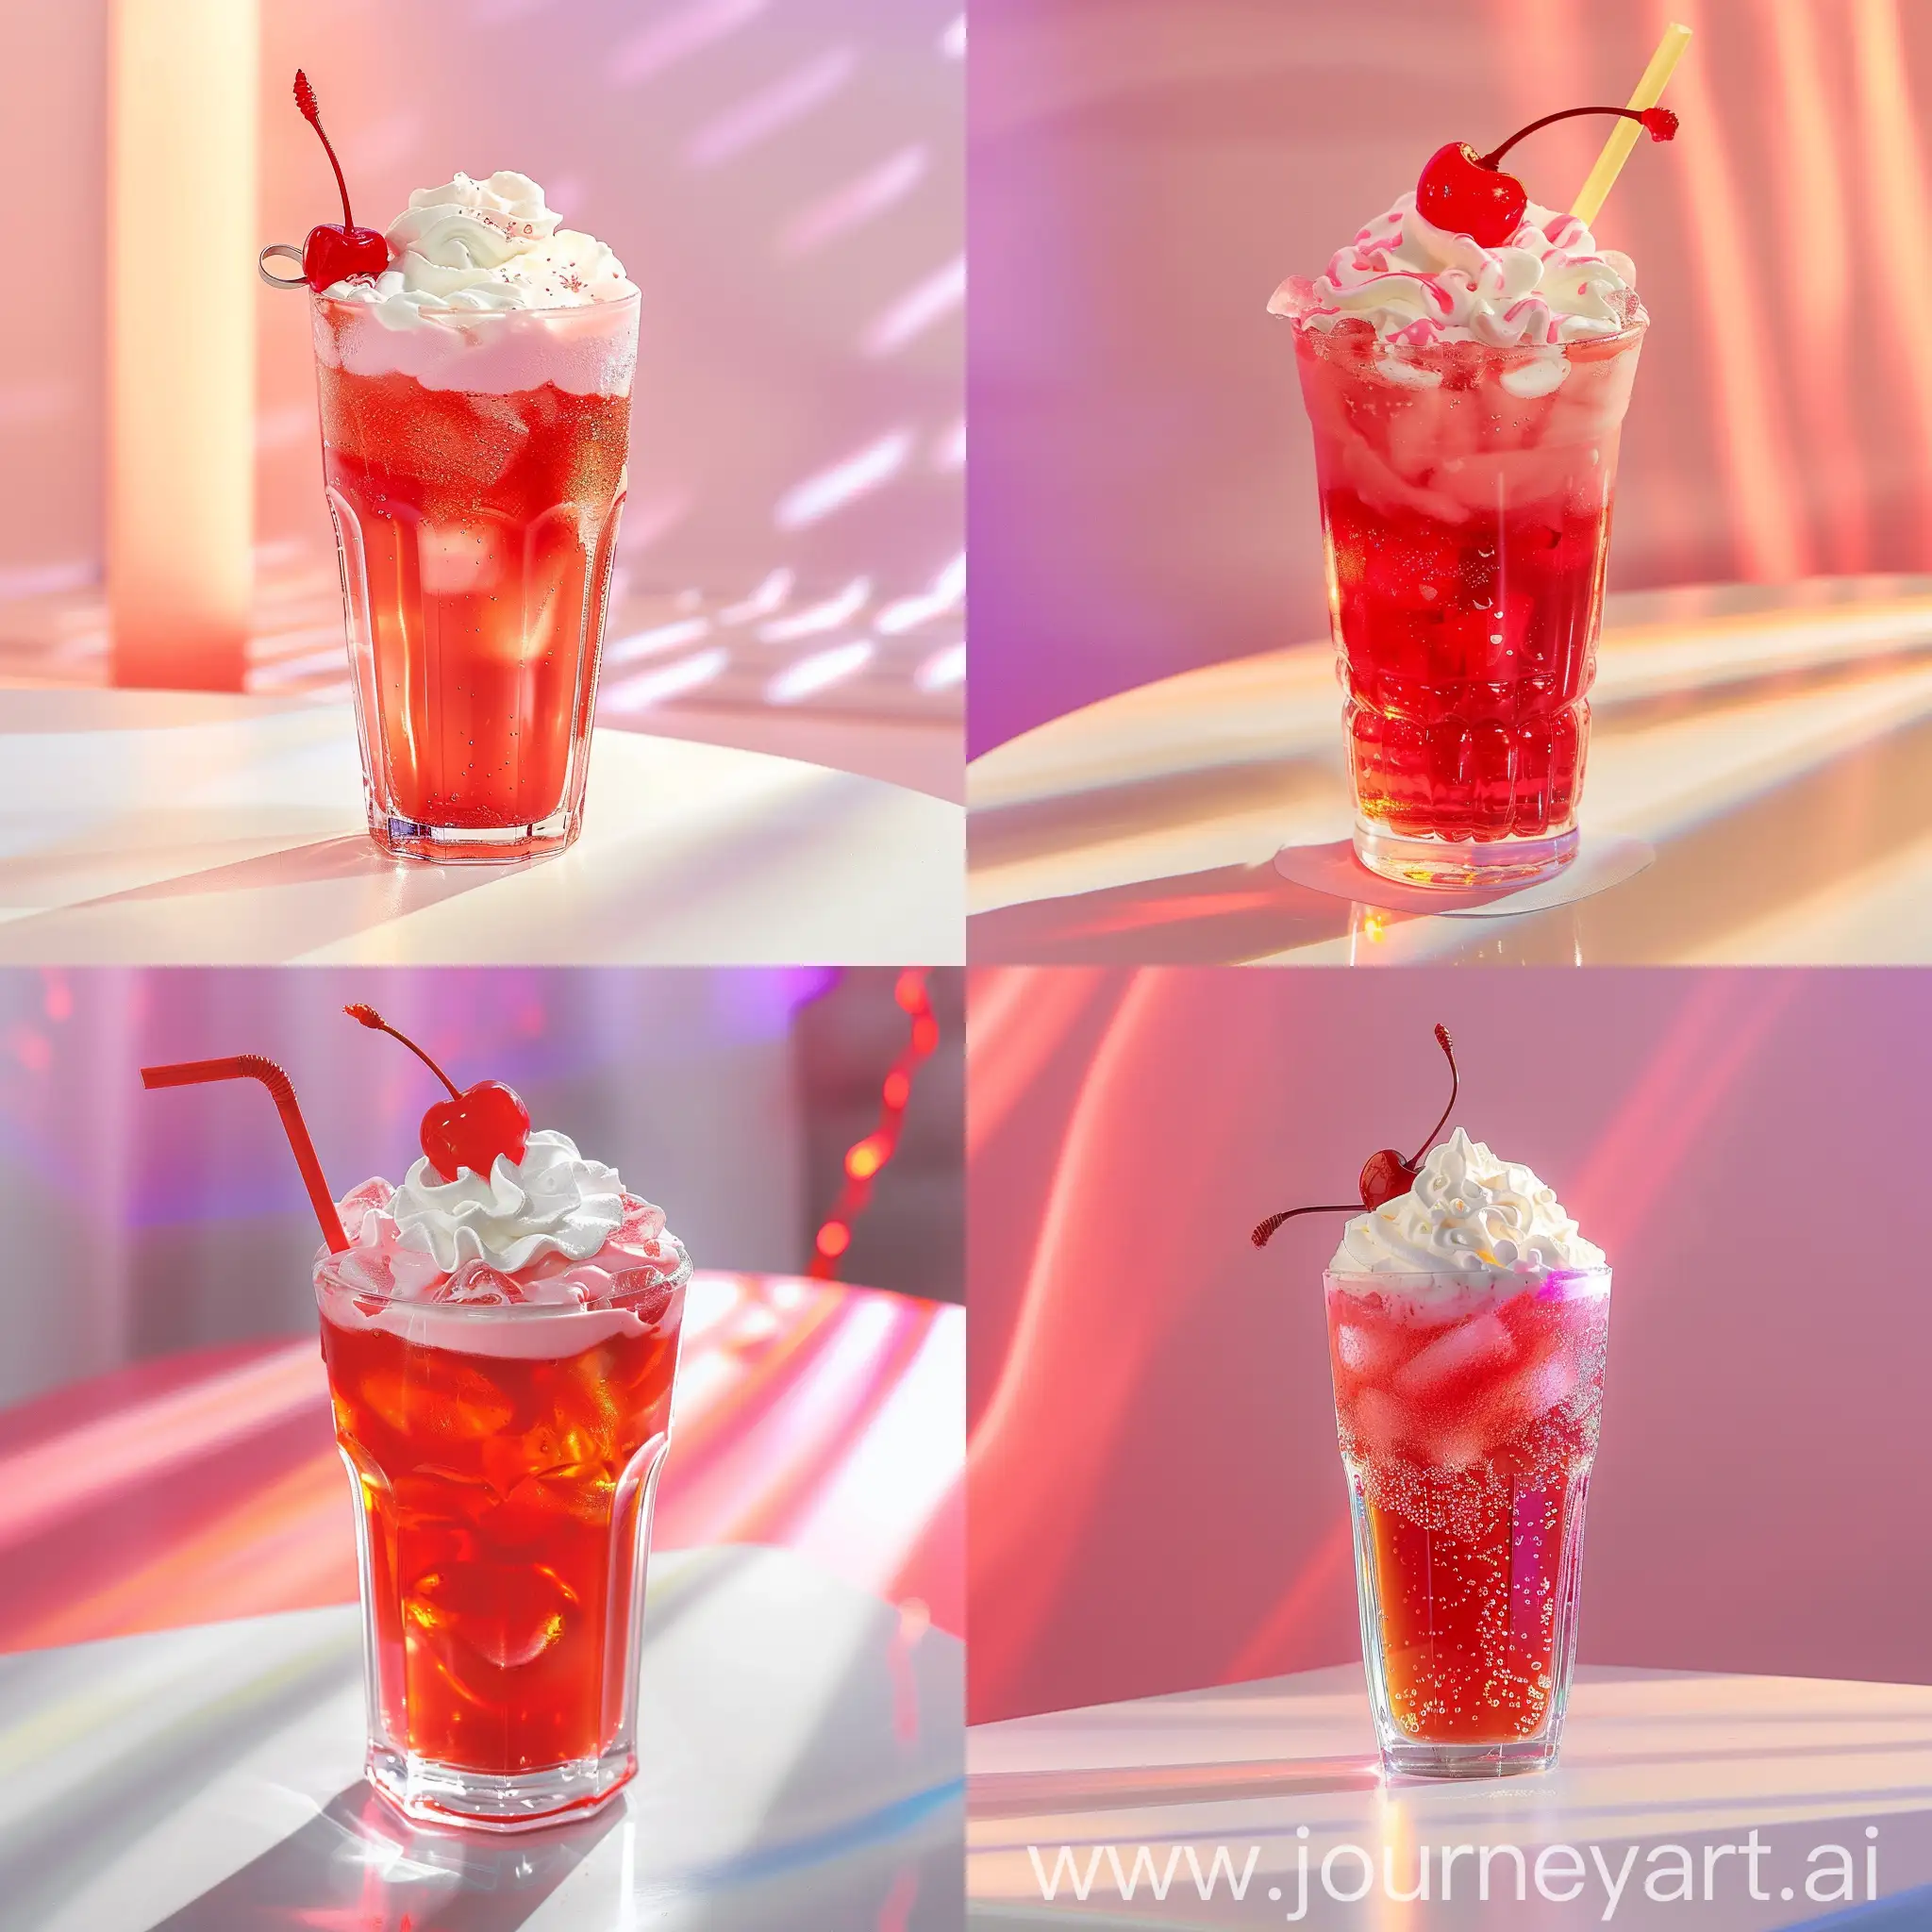 Vibrant-Red-Iced-Soda-Delight-with-Whipped-Cream-and-Cherry